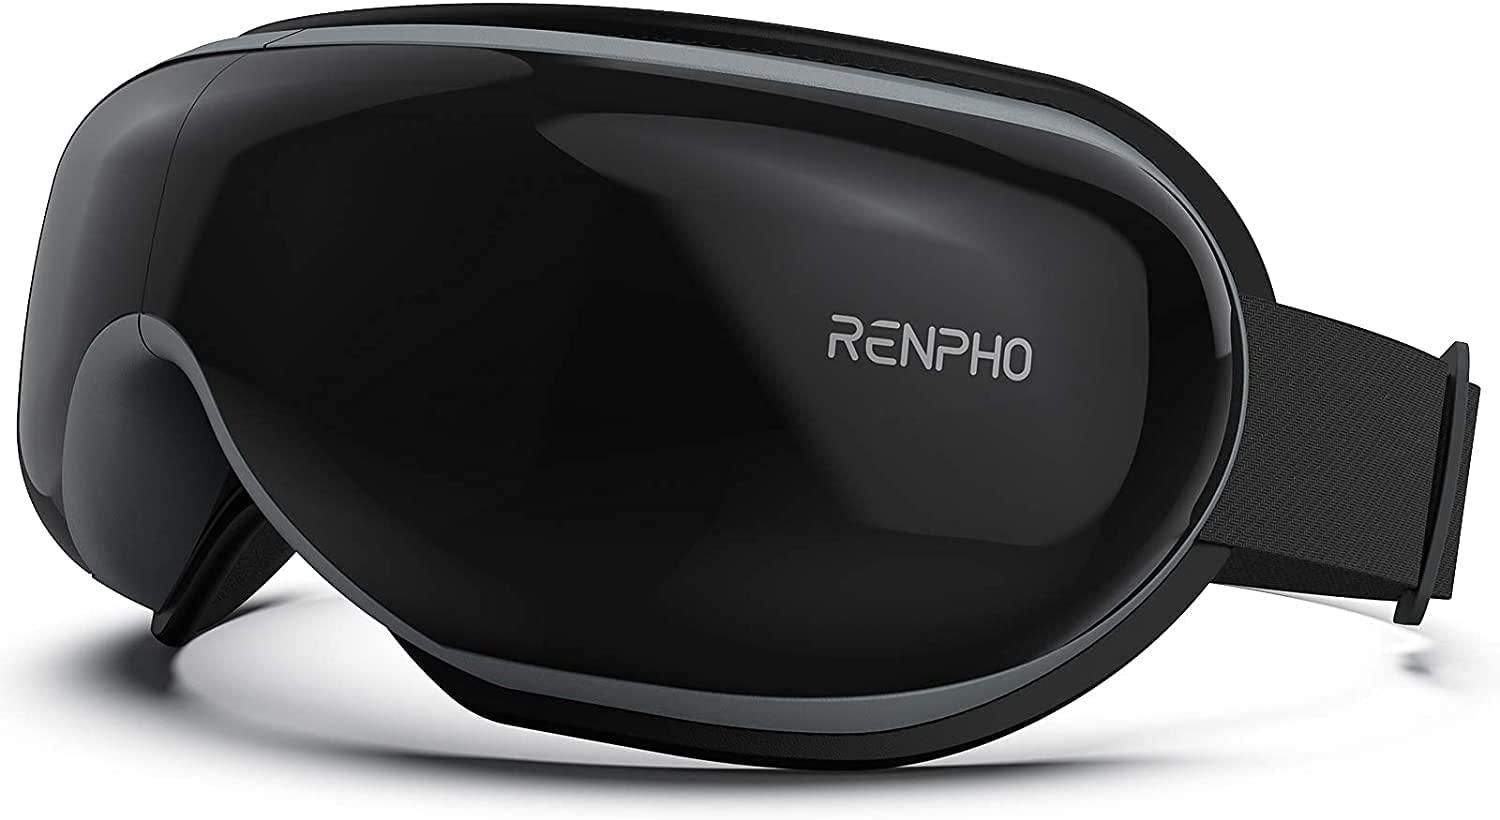 Renpho Eye Massager with Heat for $47.59 Shipped